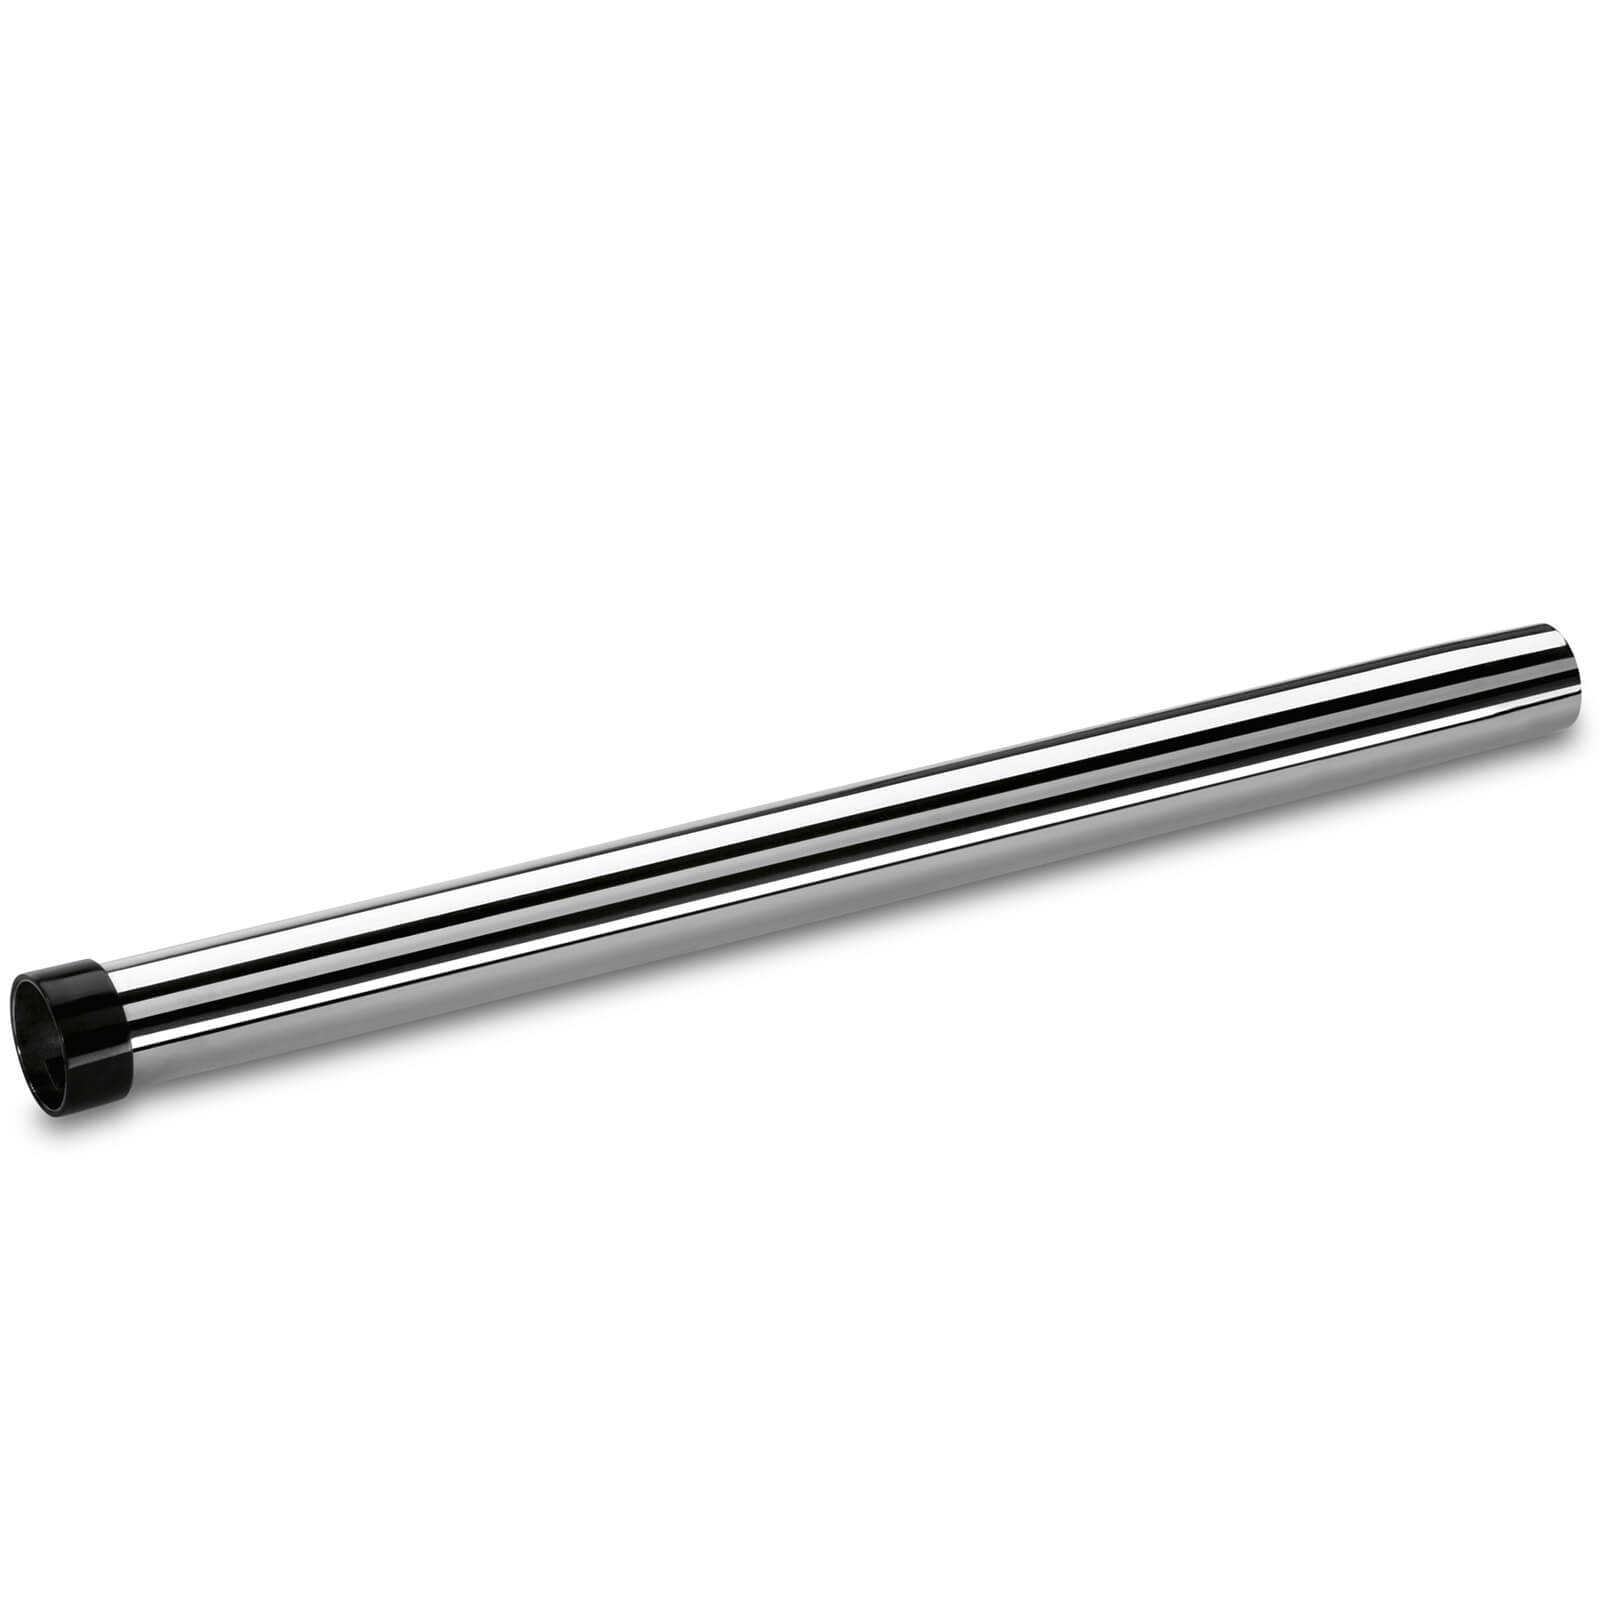 Image of Karcher Metal Suction Tube for NT 27/1, 35/1, 45/1 and 48/1 Vacuum Cleaners